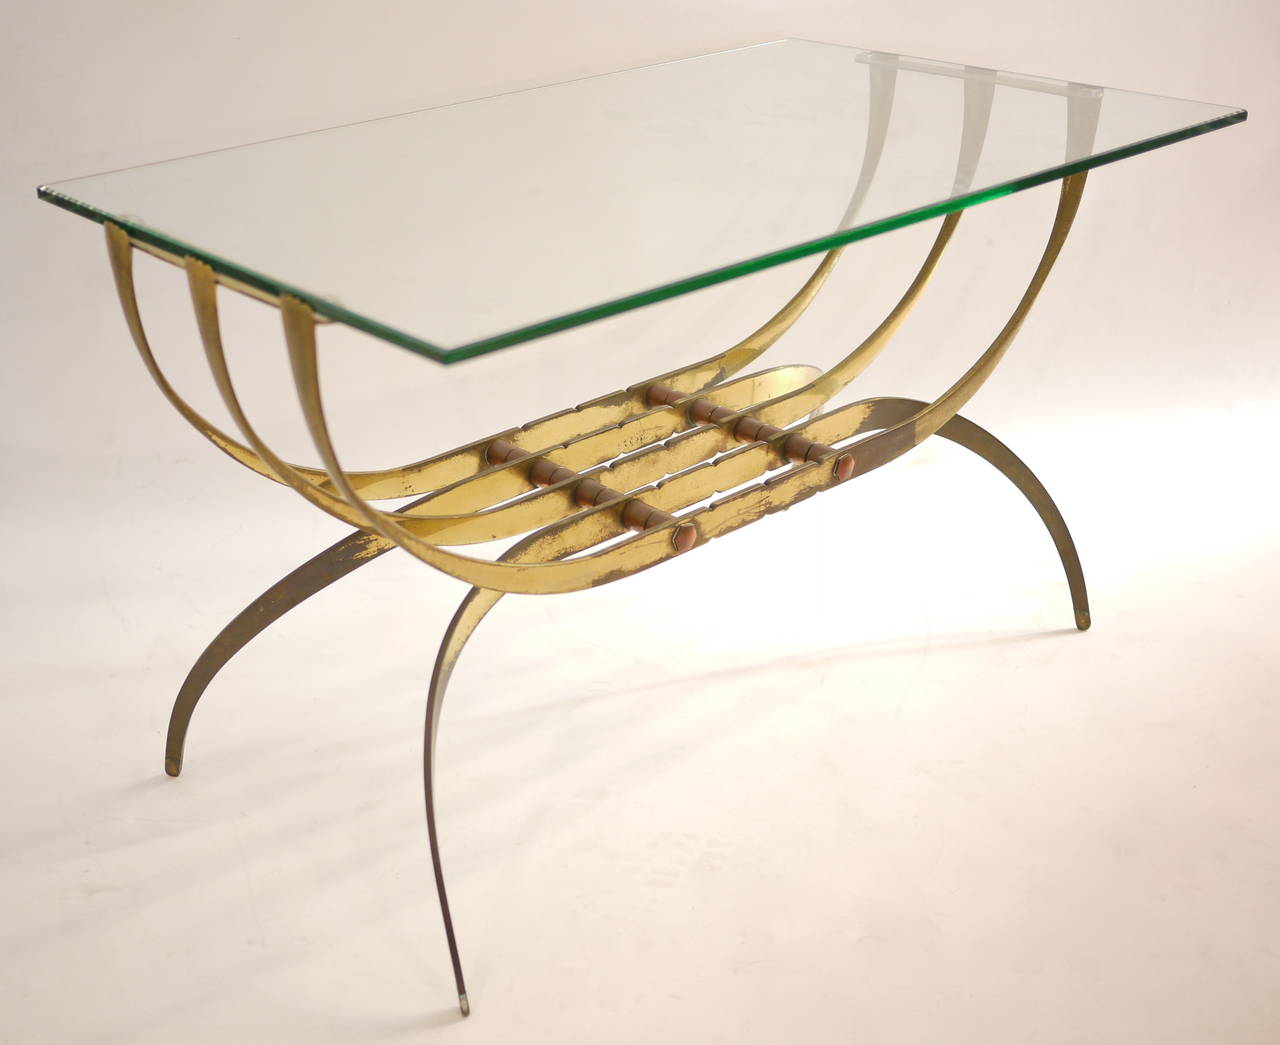 A 1940 coffe table . Brass and cystal-cut glass.